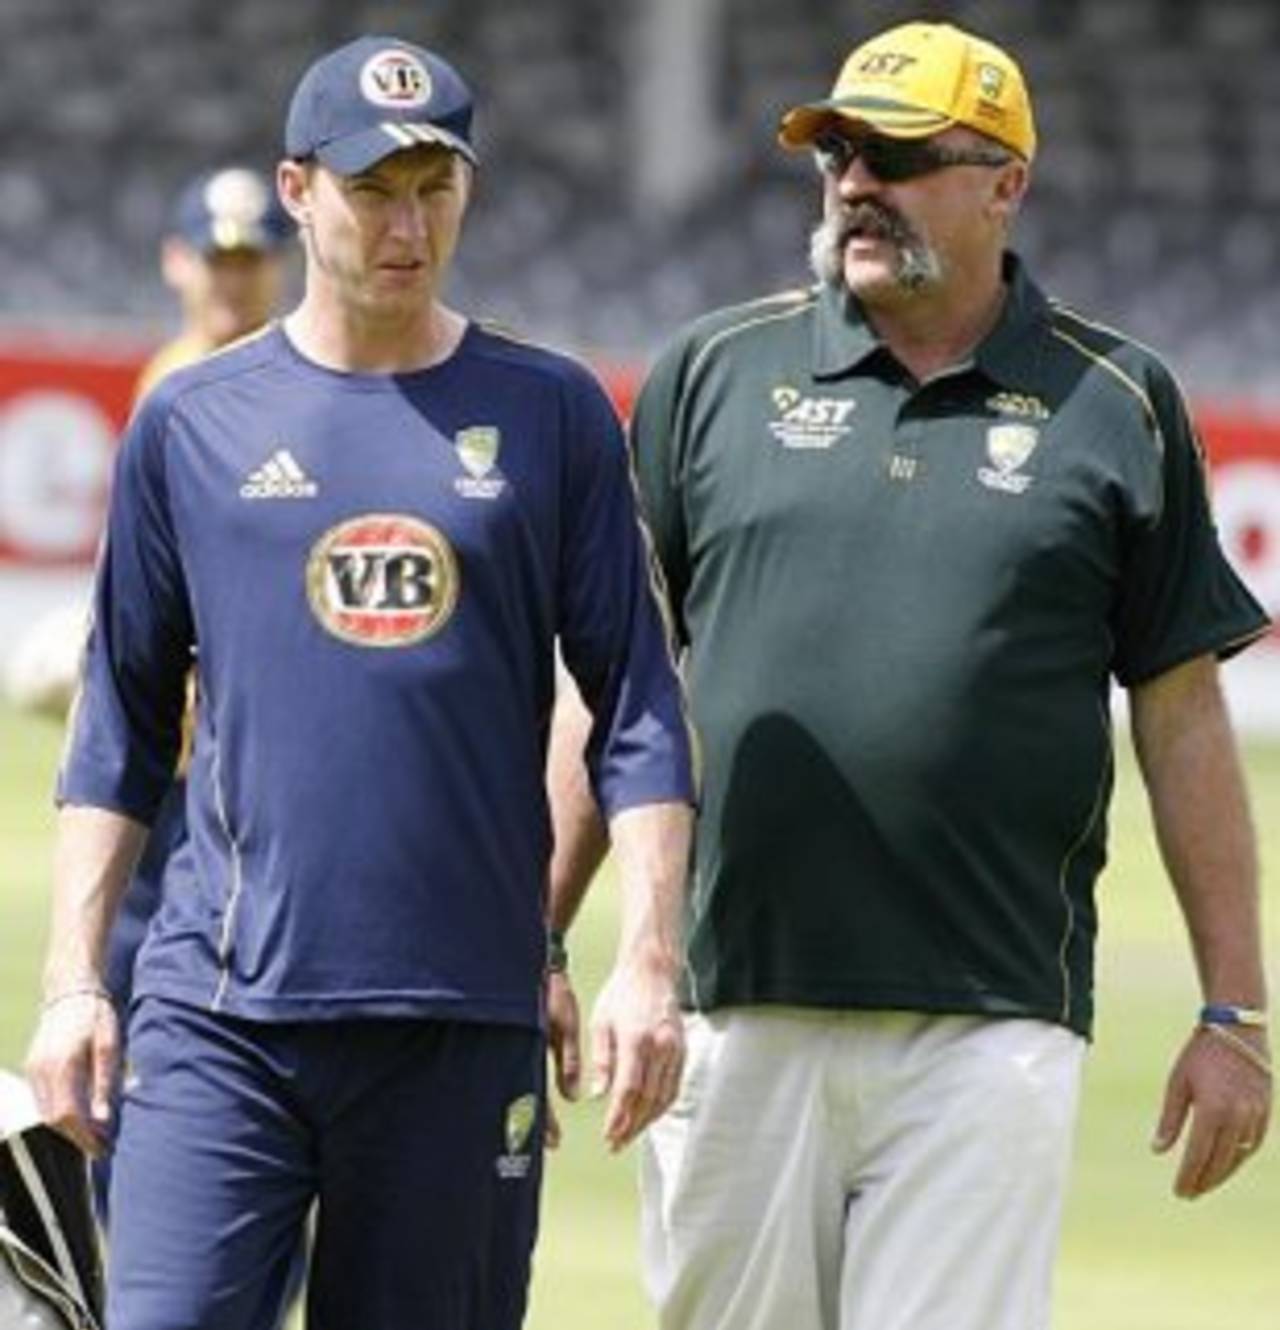 Brett Lee wants "to get out there and play"&nbsp;&nbsp;&bull;&nbsp;&nbsp;AFP